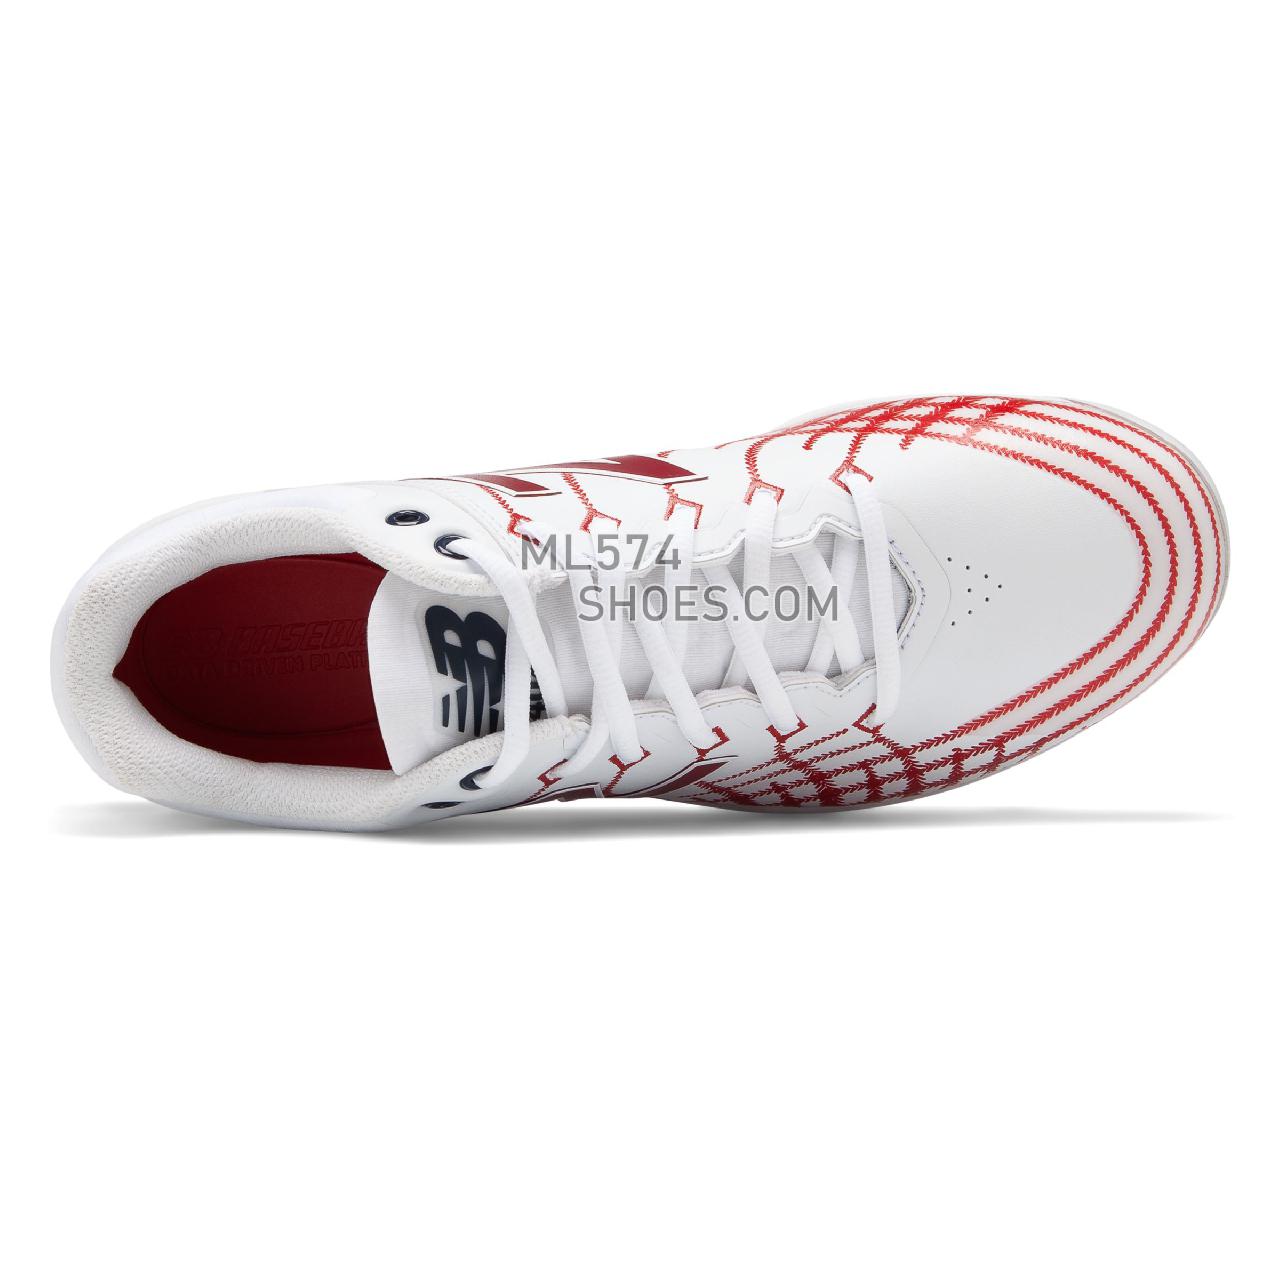 New Balance 4040v5 Hero - Men's Baseball Turf - White with Red and Team Navy - L4040AS5